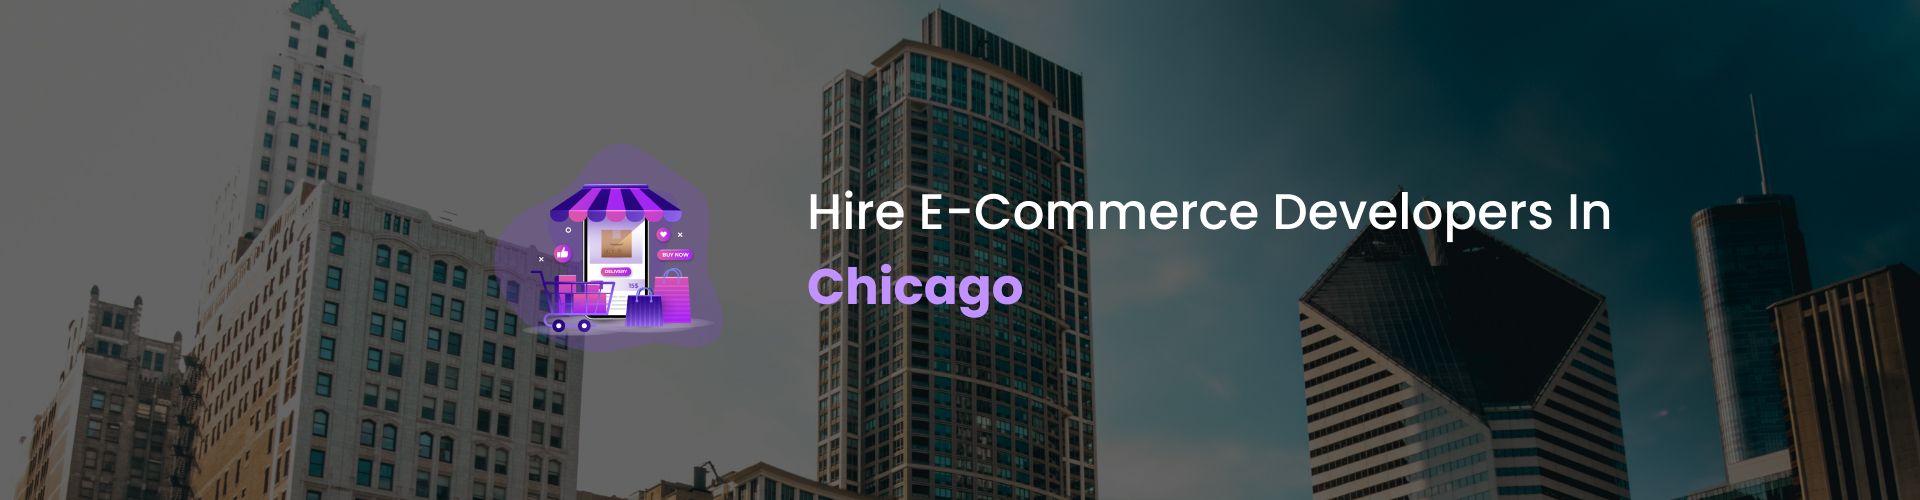 ecommerce developers in chicago